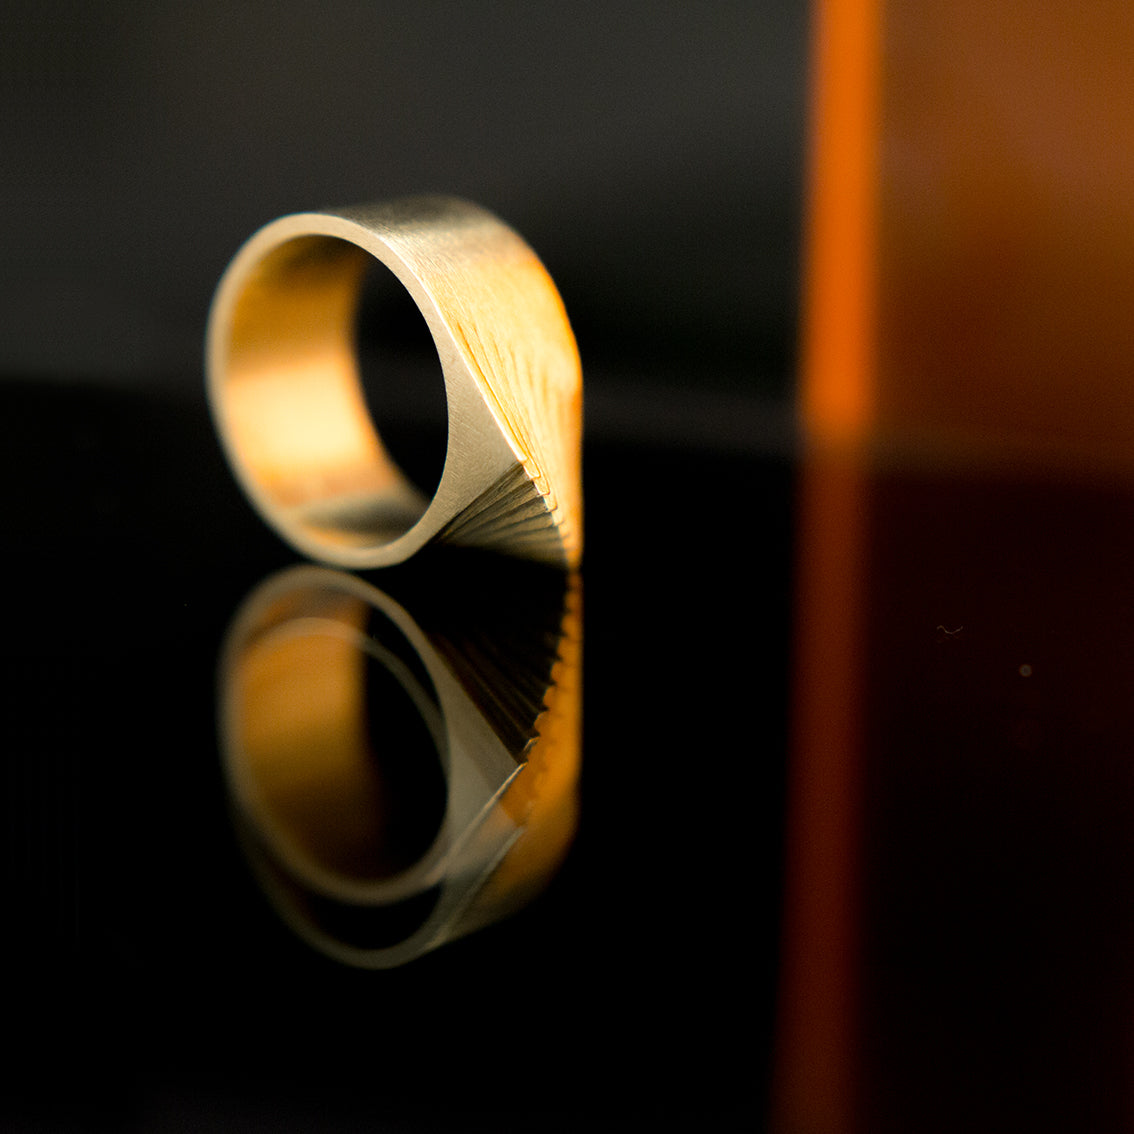 A photo of an attention grabbing brass ring laying on a reflective black surface with some orange coloured reflection in the background. The photo has dimmed lighting and the ring has a low glow. The ring seems to be made of layers rotating on the same axes. It has a pointy top edge which seems like a spine of a creature. The rhythm of the layers of the ring is the focus of the photo. The photo has sexy elements because of shapes, reflections, colour and dimmed lighting. 